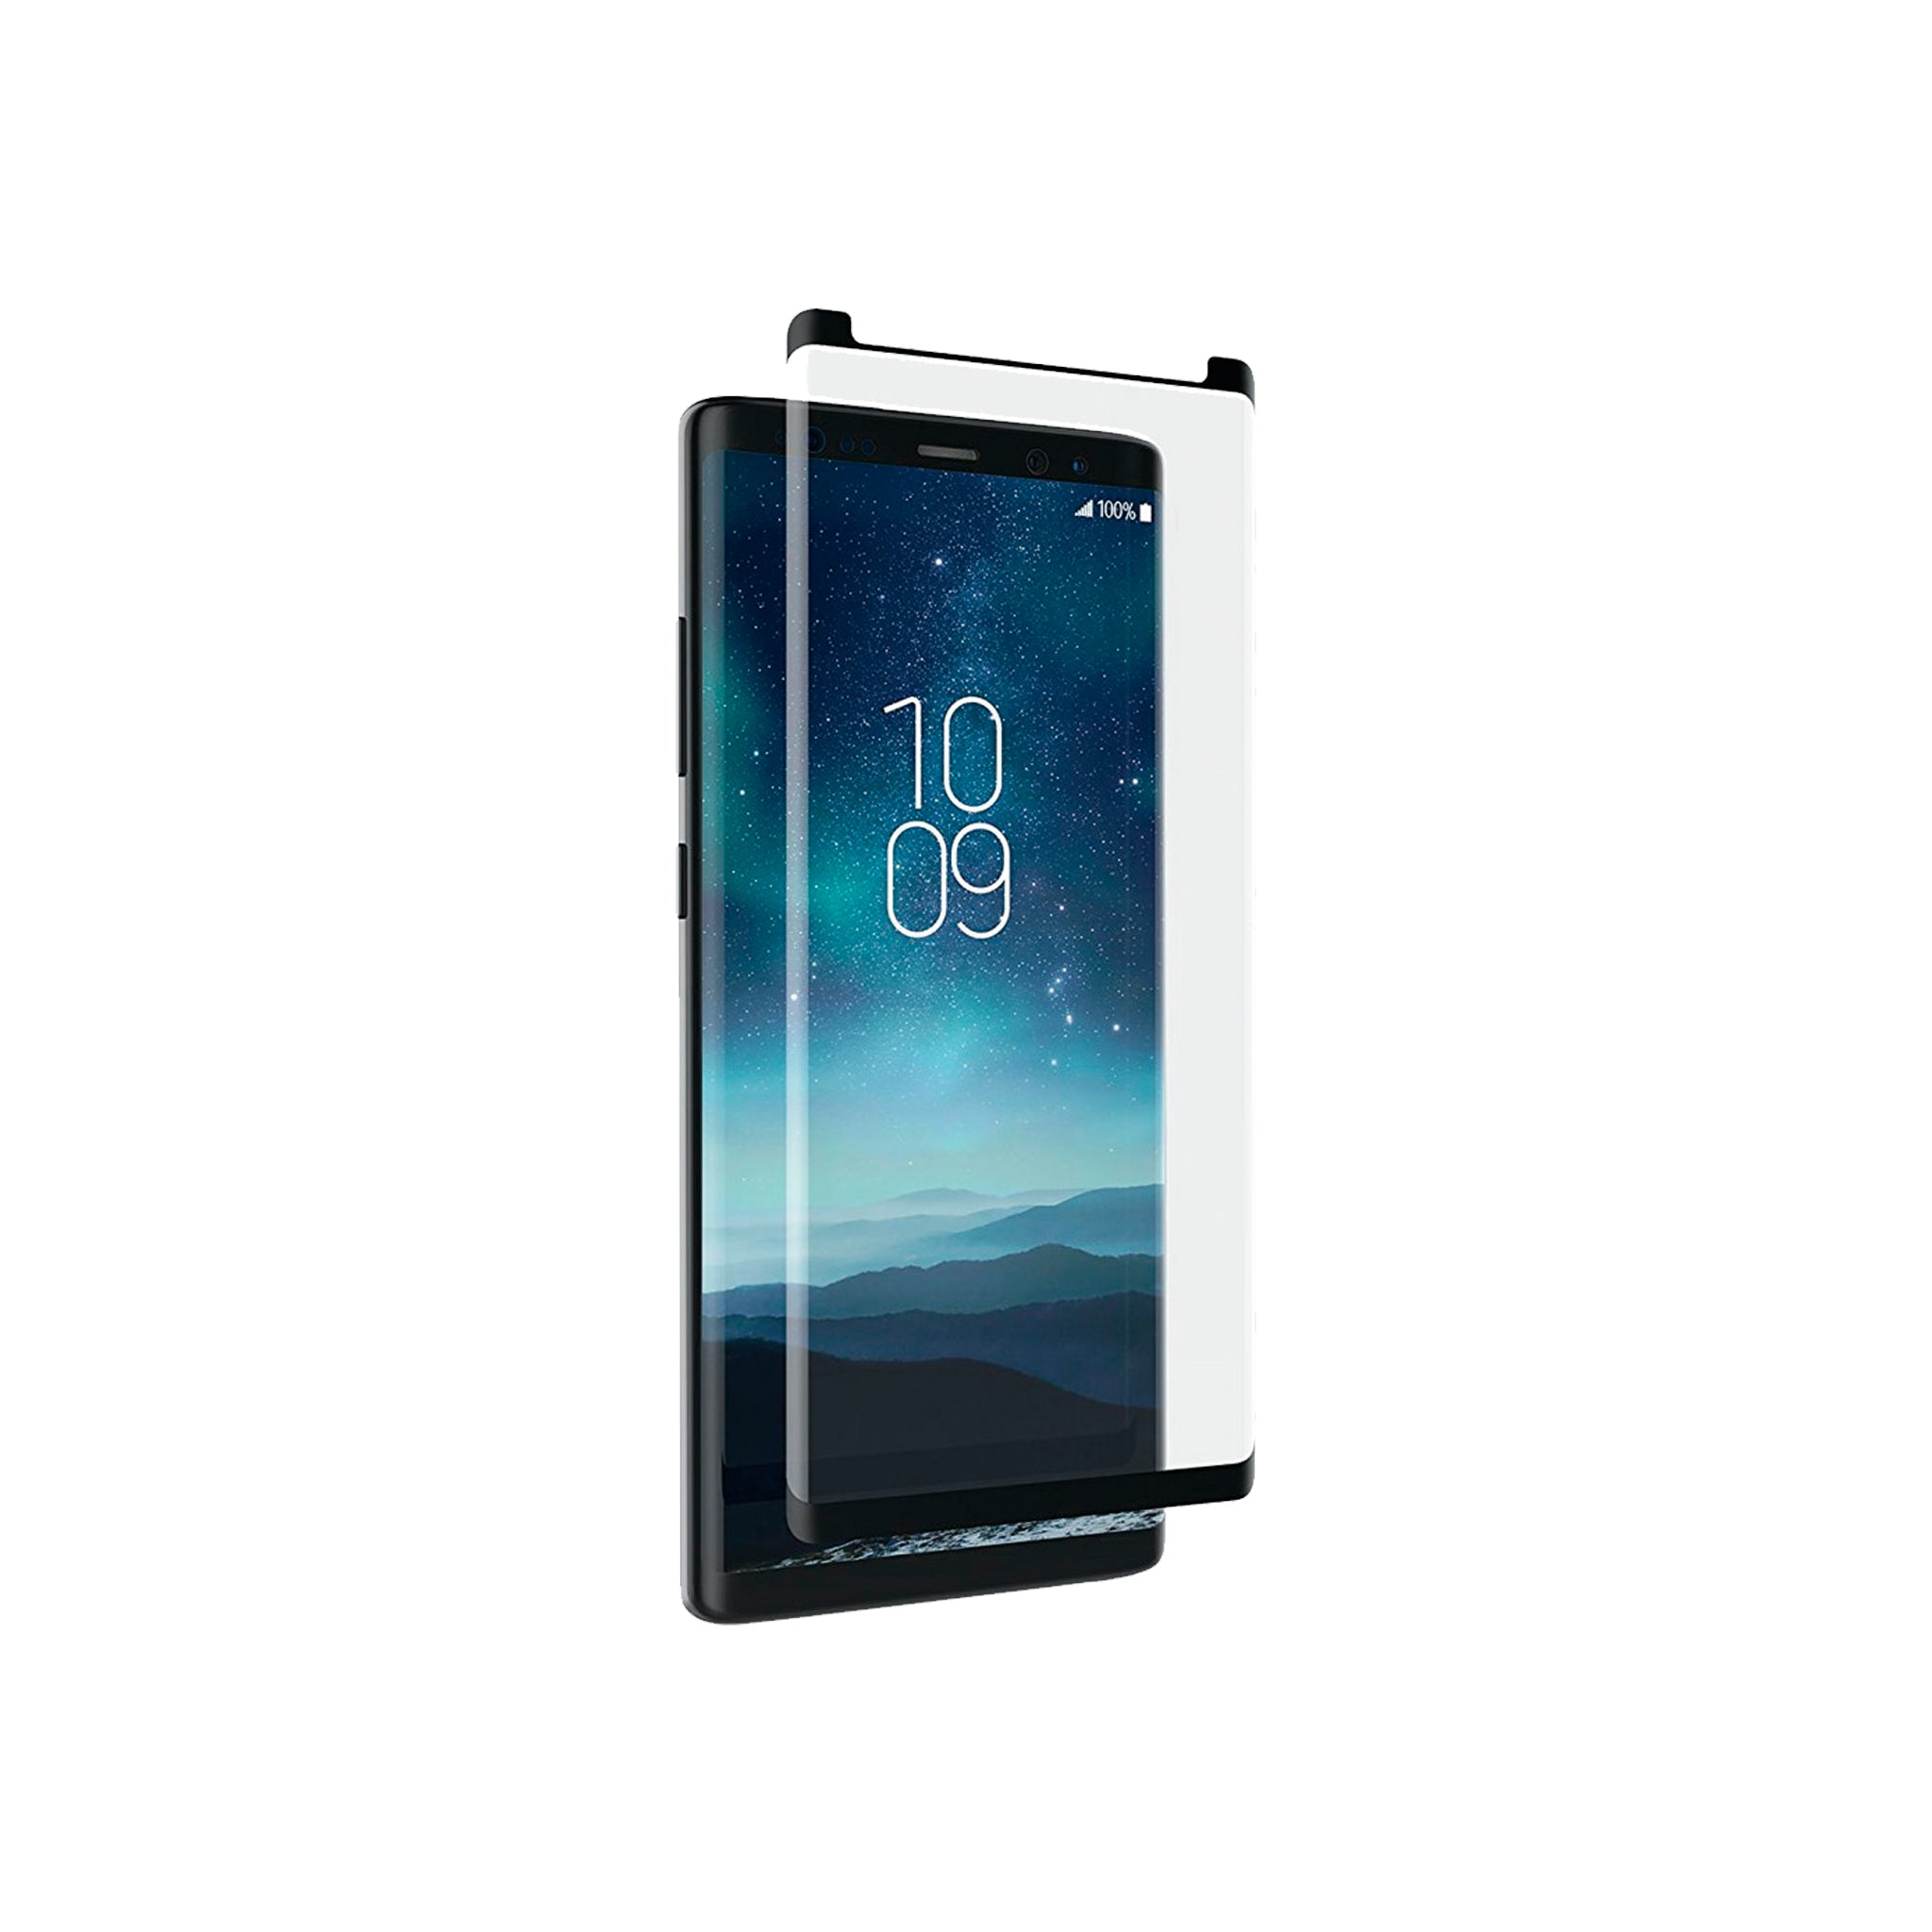 Zagg - InvisibleShield Curved Glass Screen Protector for Samsung Galaxy Note 8 - Clear with Black Border